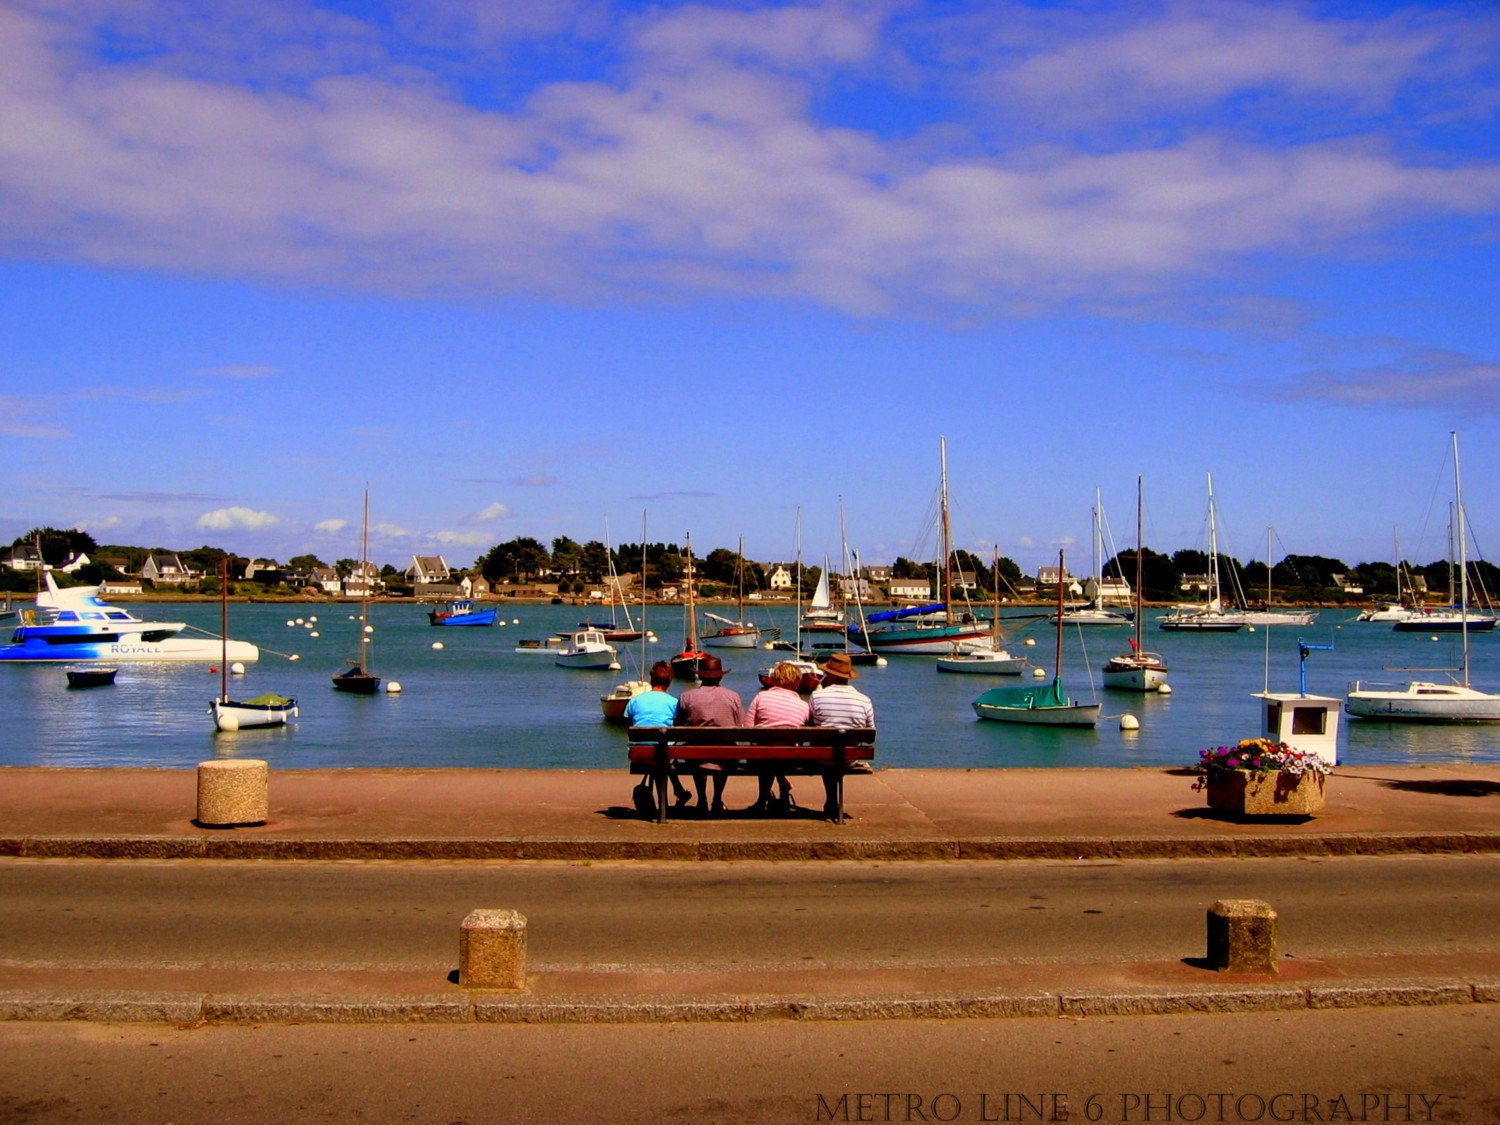 Old men on a bench 8x10 Photography Print